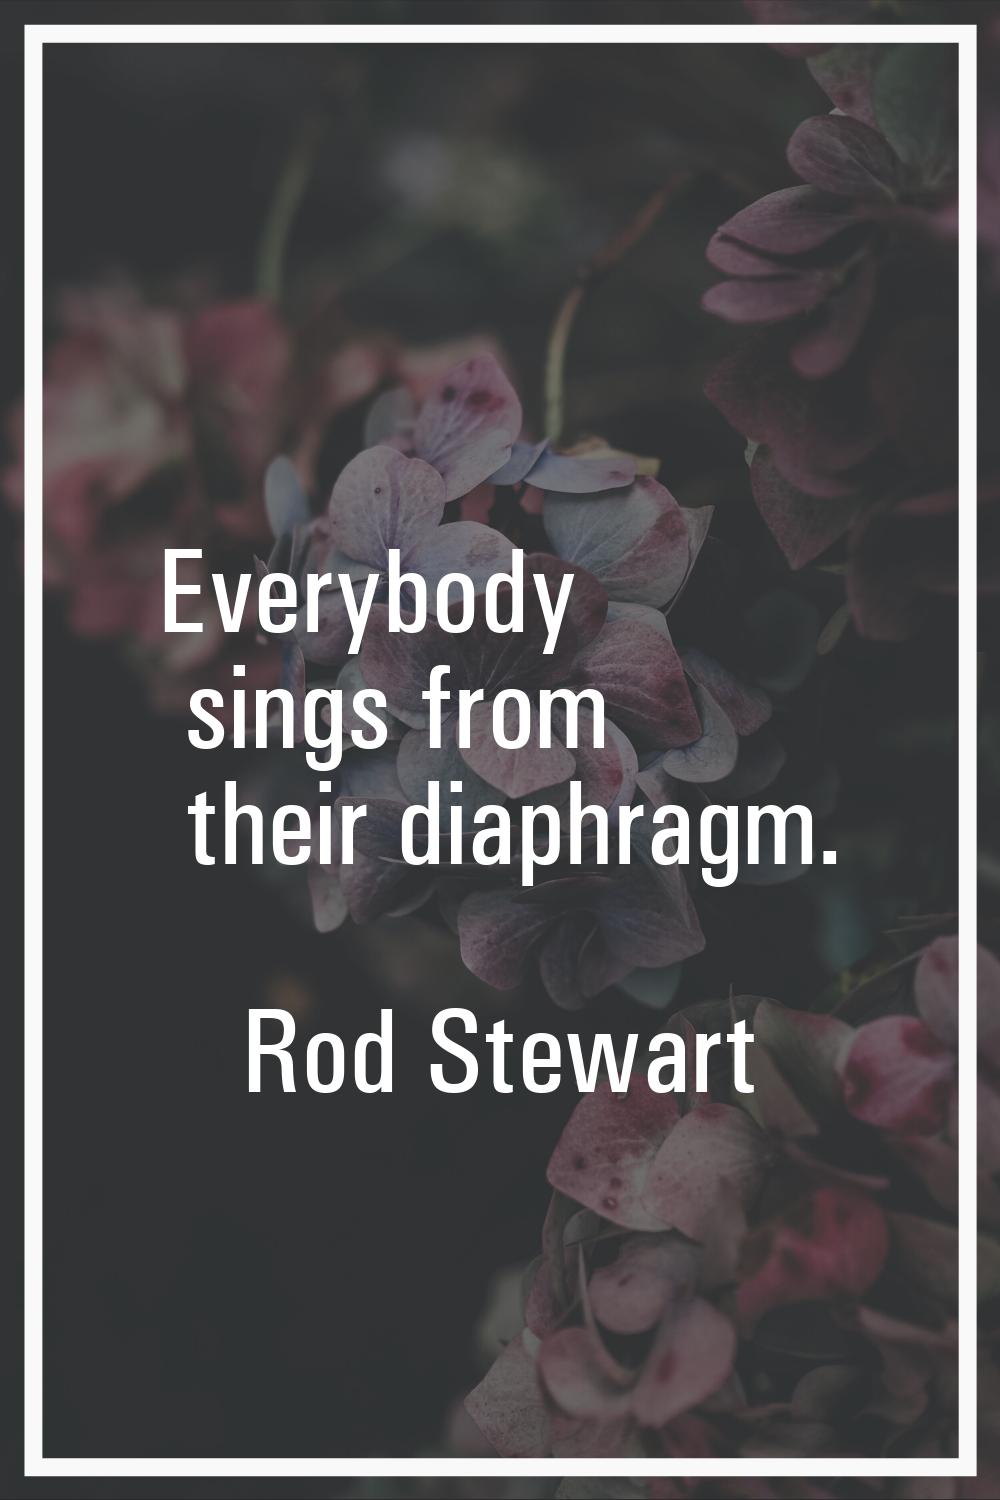 Everybody sings from their diaphragm.